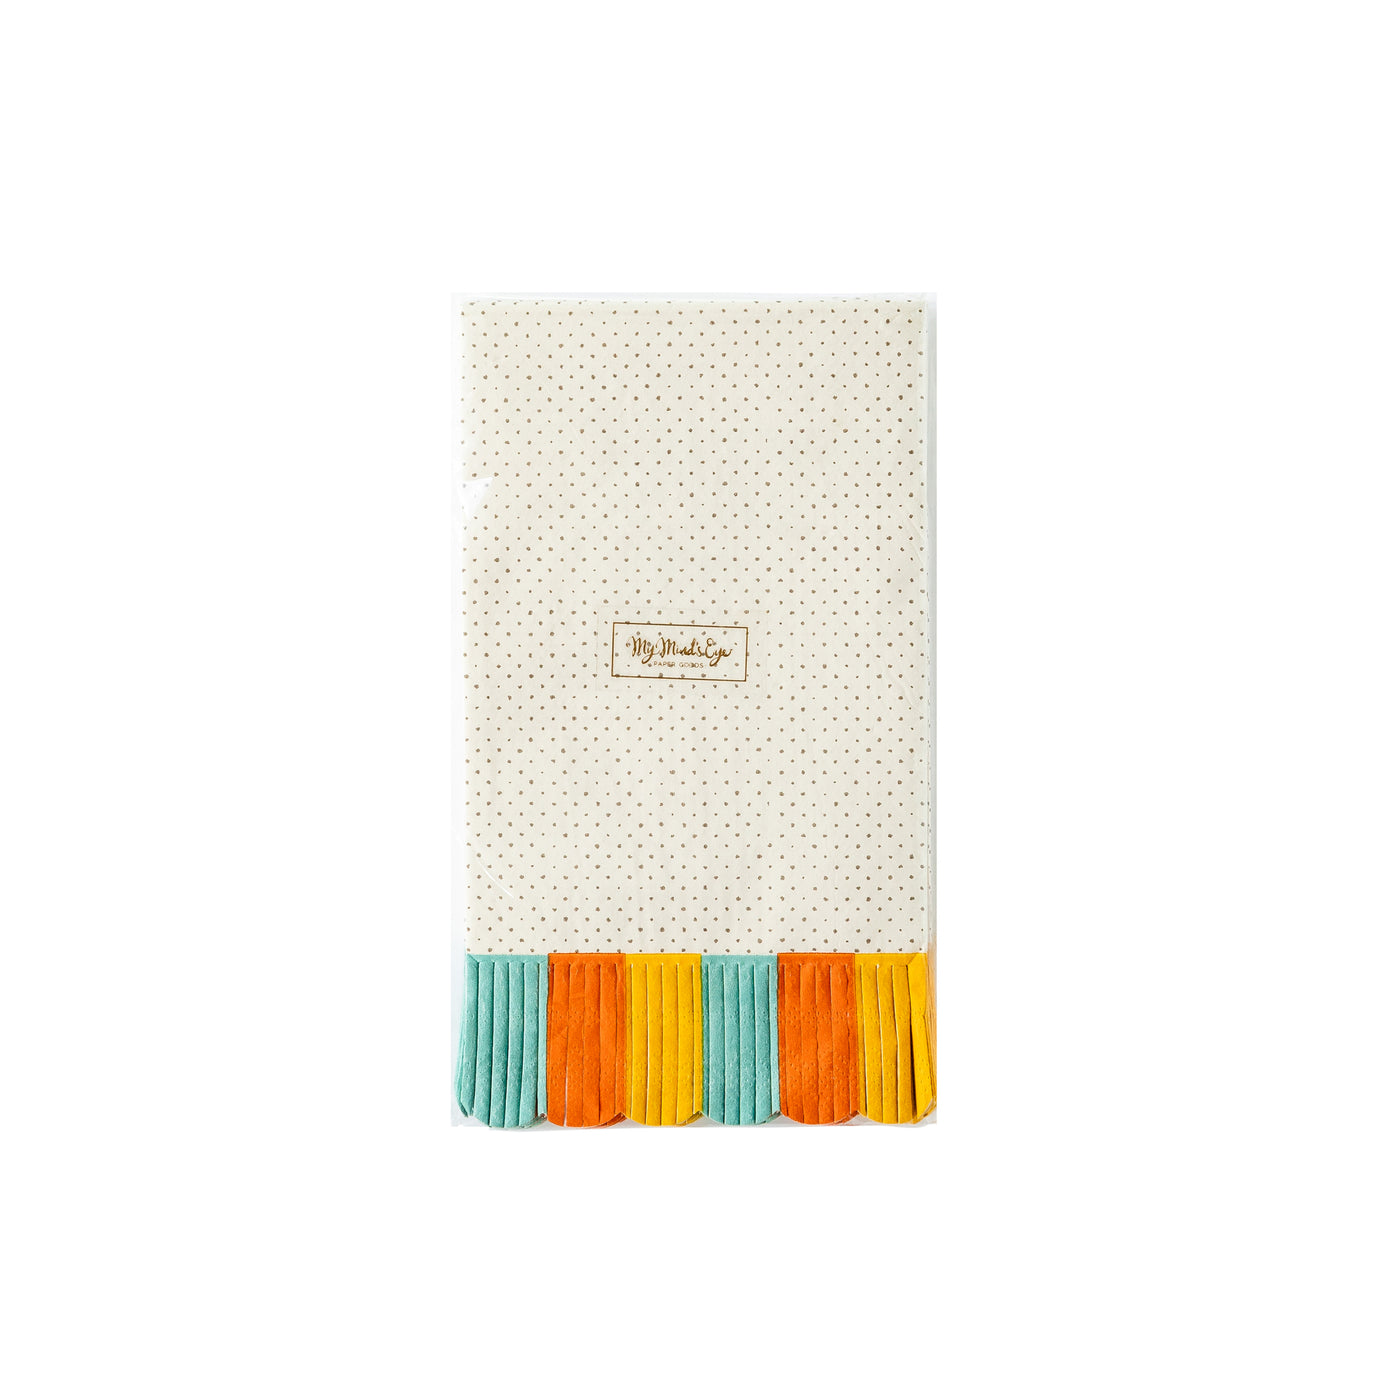 Harvest Scalloped and Fringed Guest Napkin